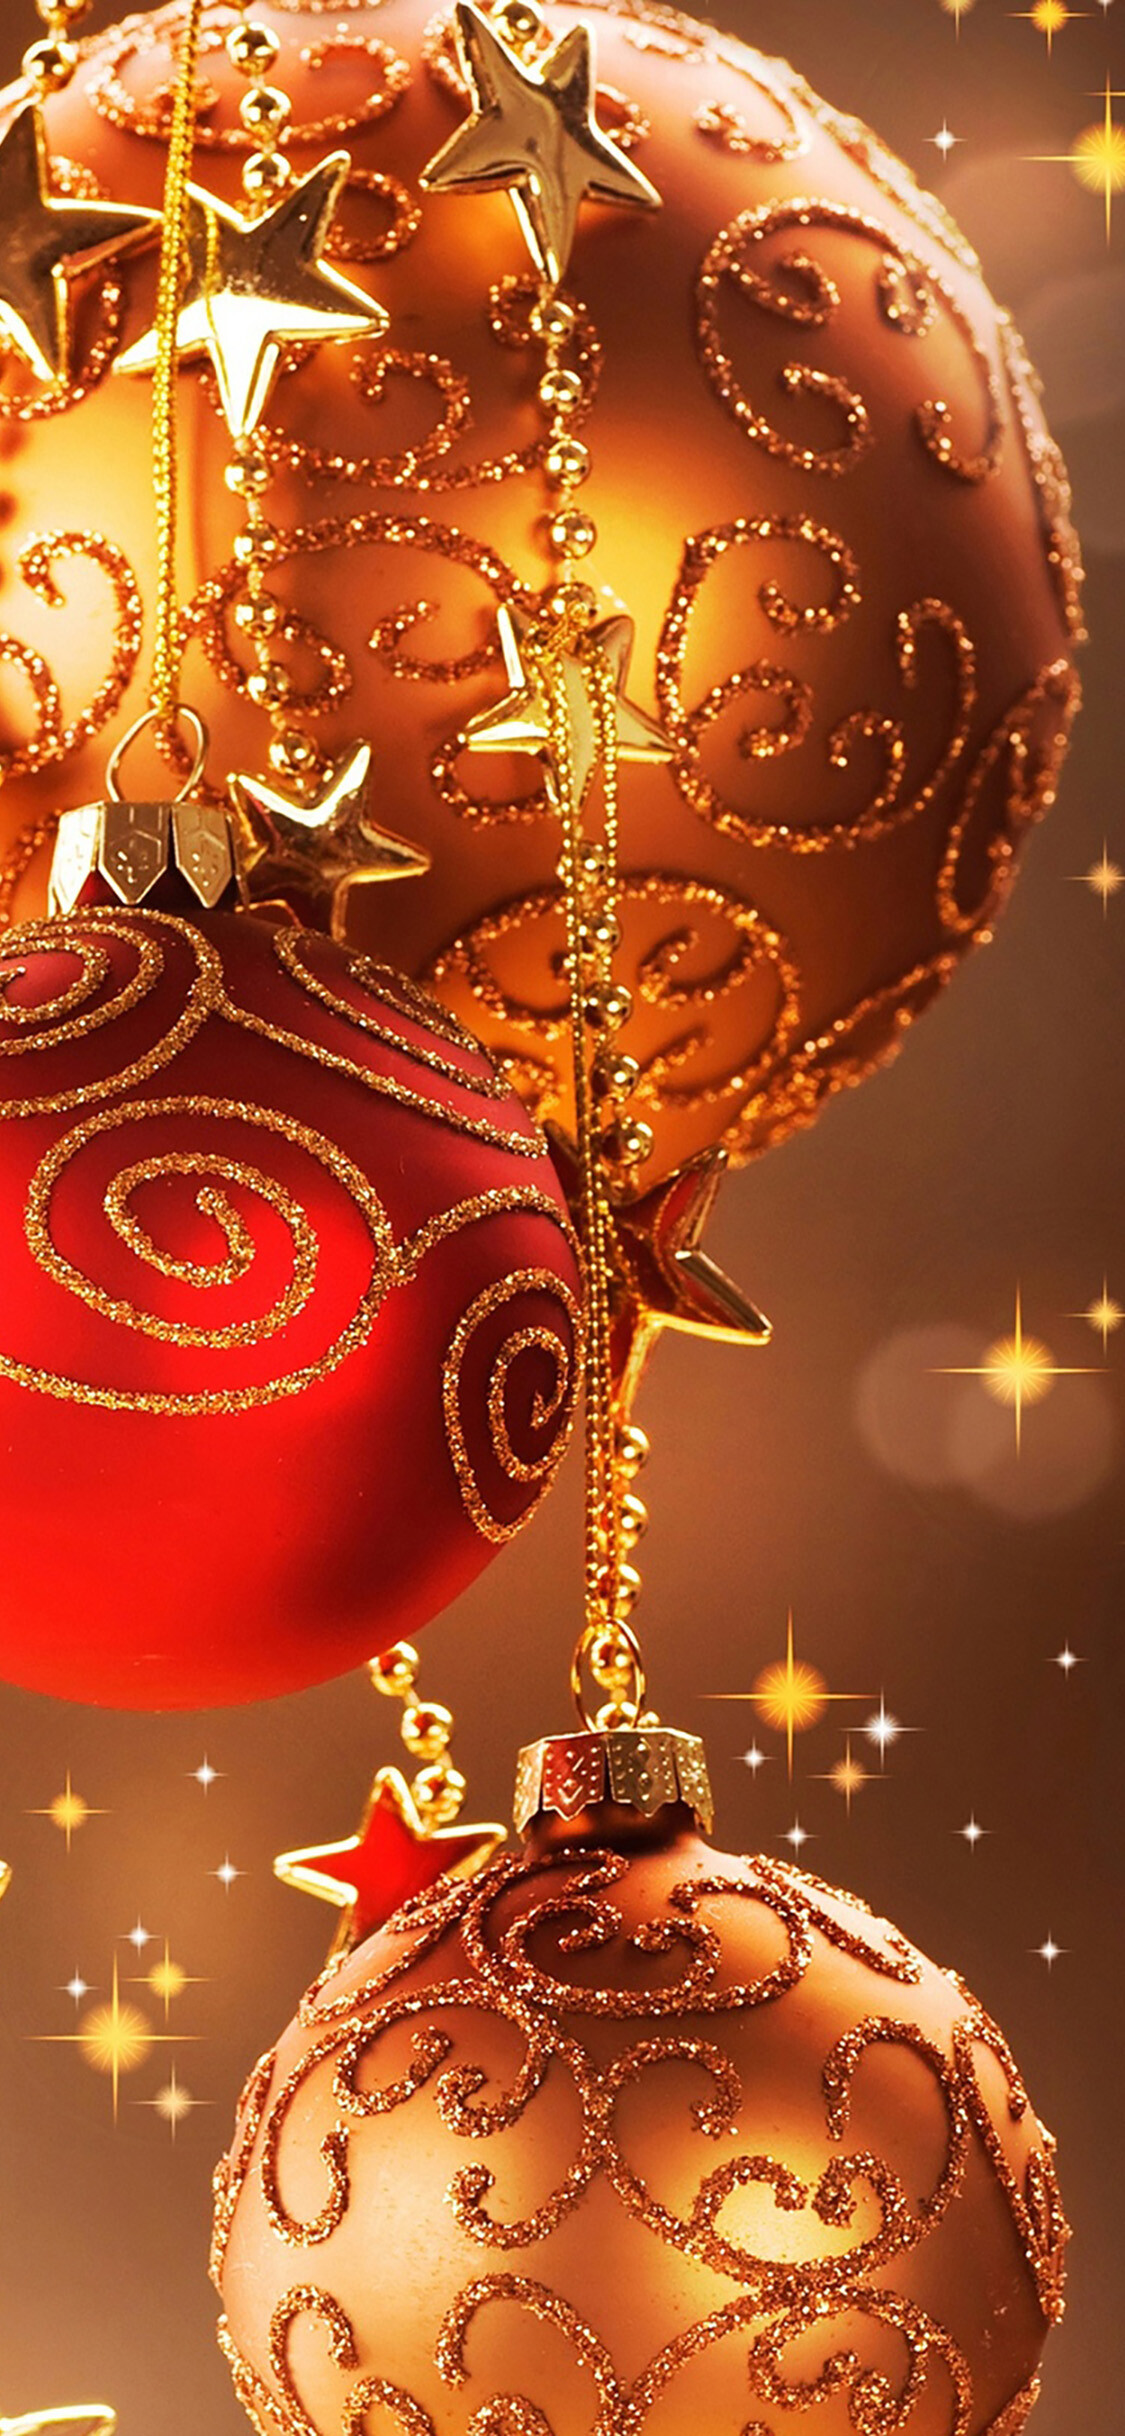 Gold Glitter: The Christmas bubbles, Covered with precious foil balls for the Christmas tree. 1130x2440 HD Wallpaper.